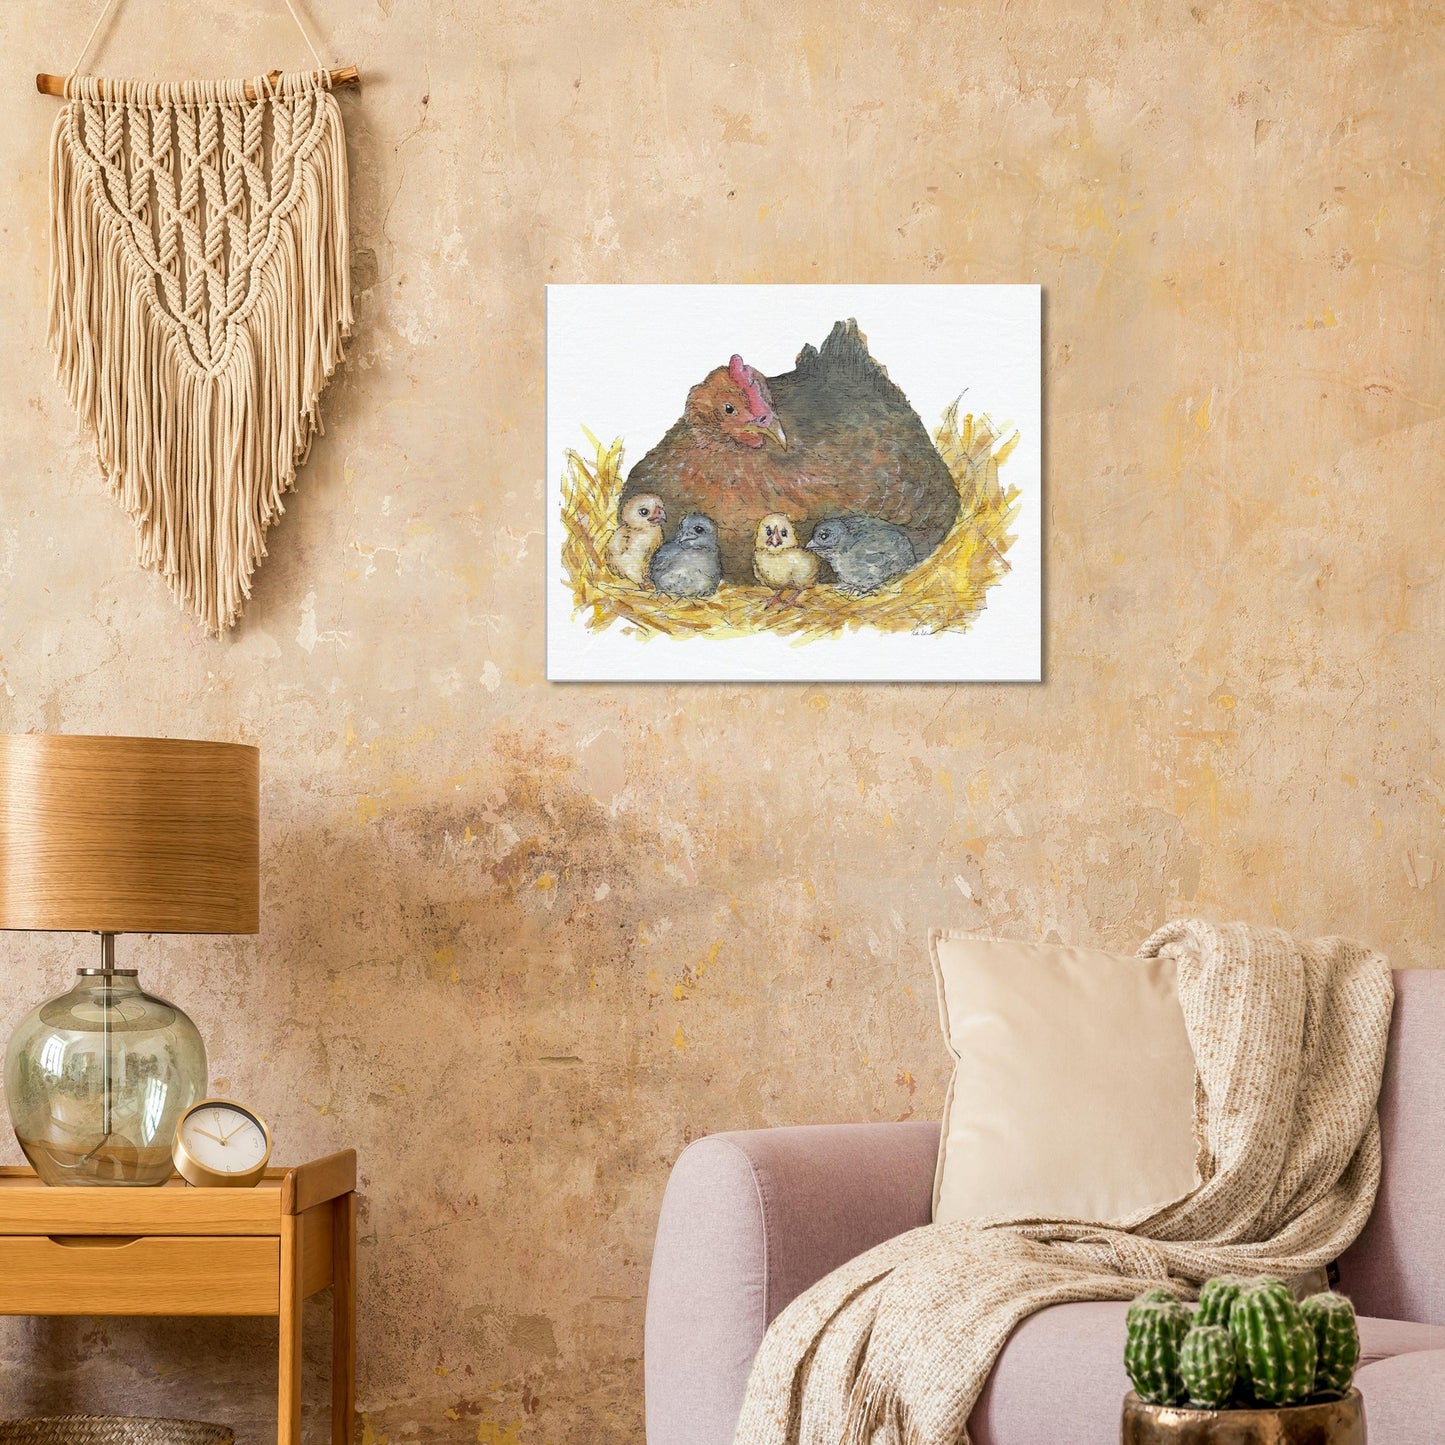 24 by 30 inch slim canvas Mother Hen print. Features a watercolor mother hen and her four chicks in a nest. Shown on tan wall above pink armchair and lamp.